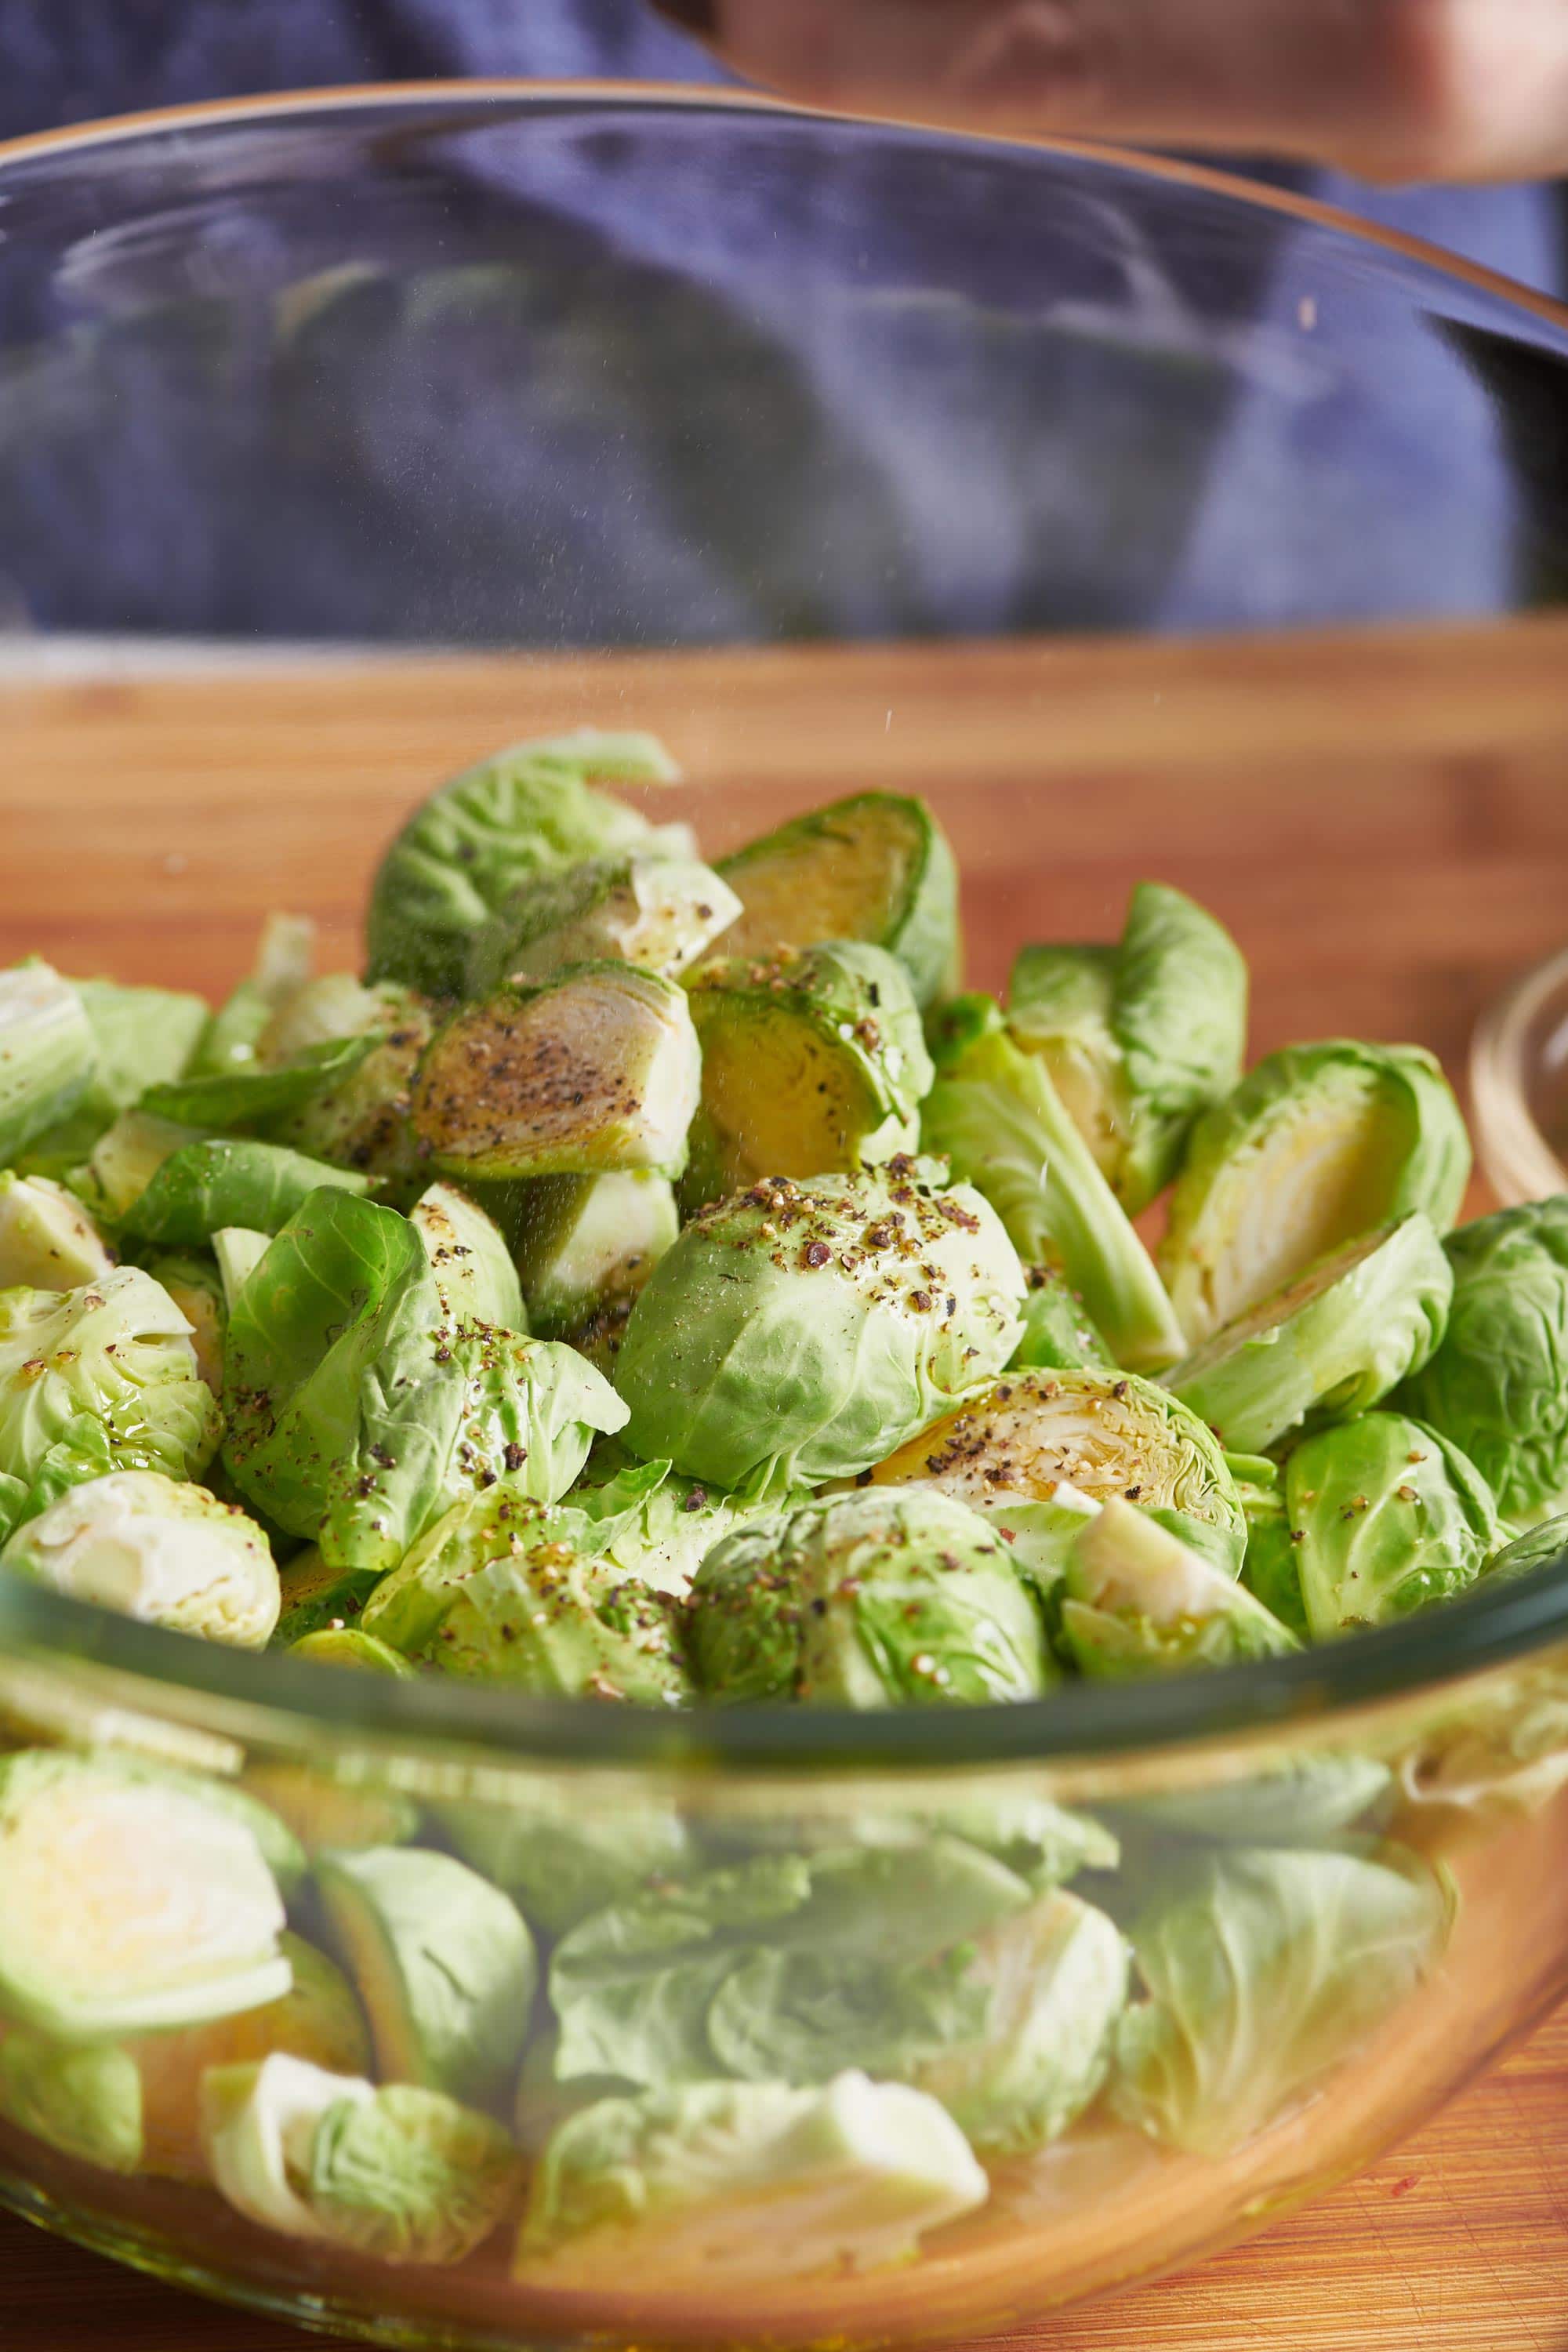 Seasoned, halved brussels sprouts in a glass bowl.